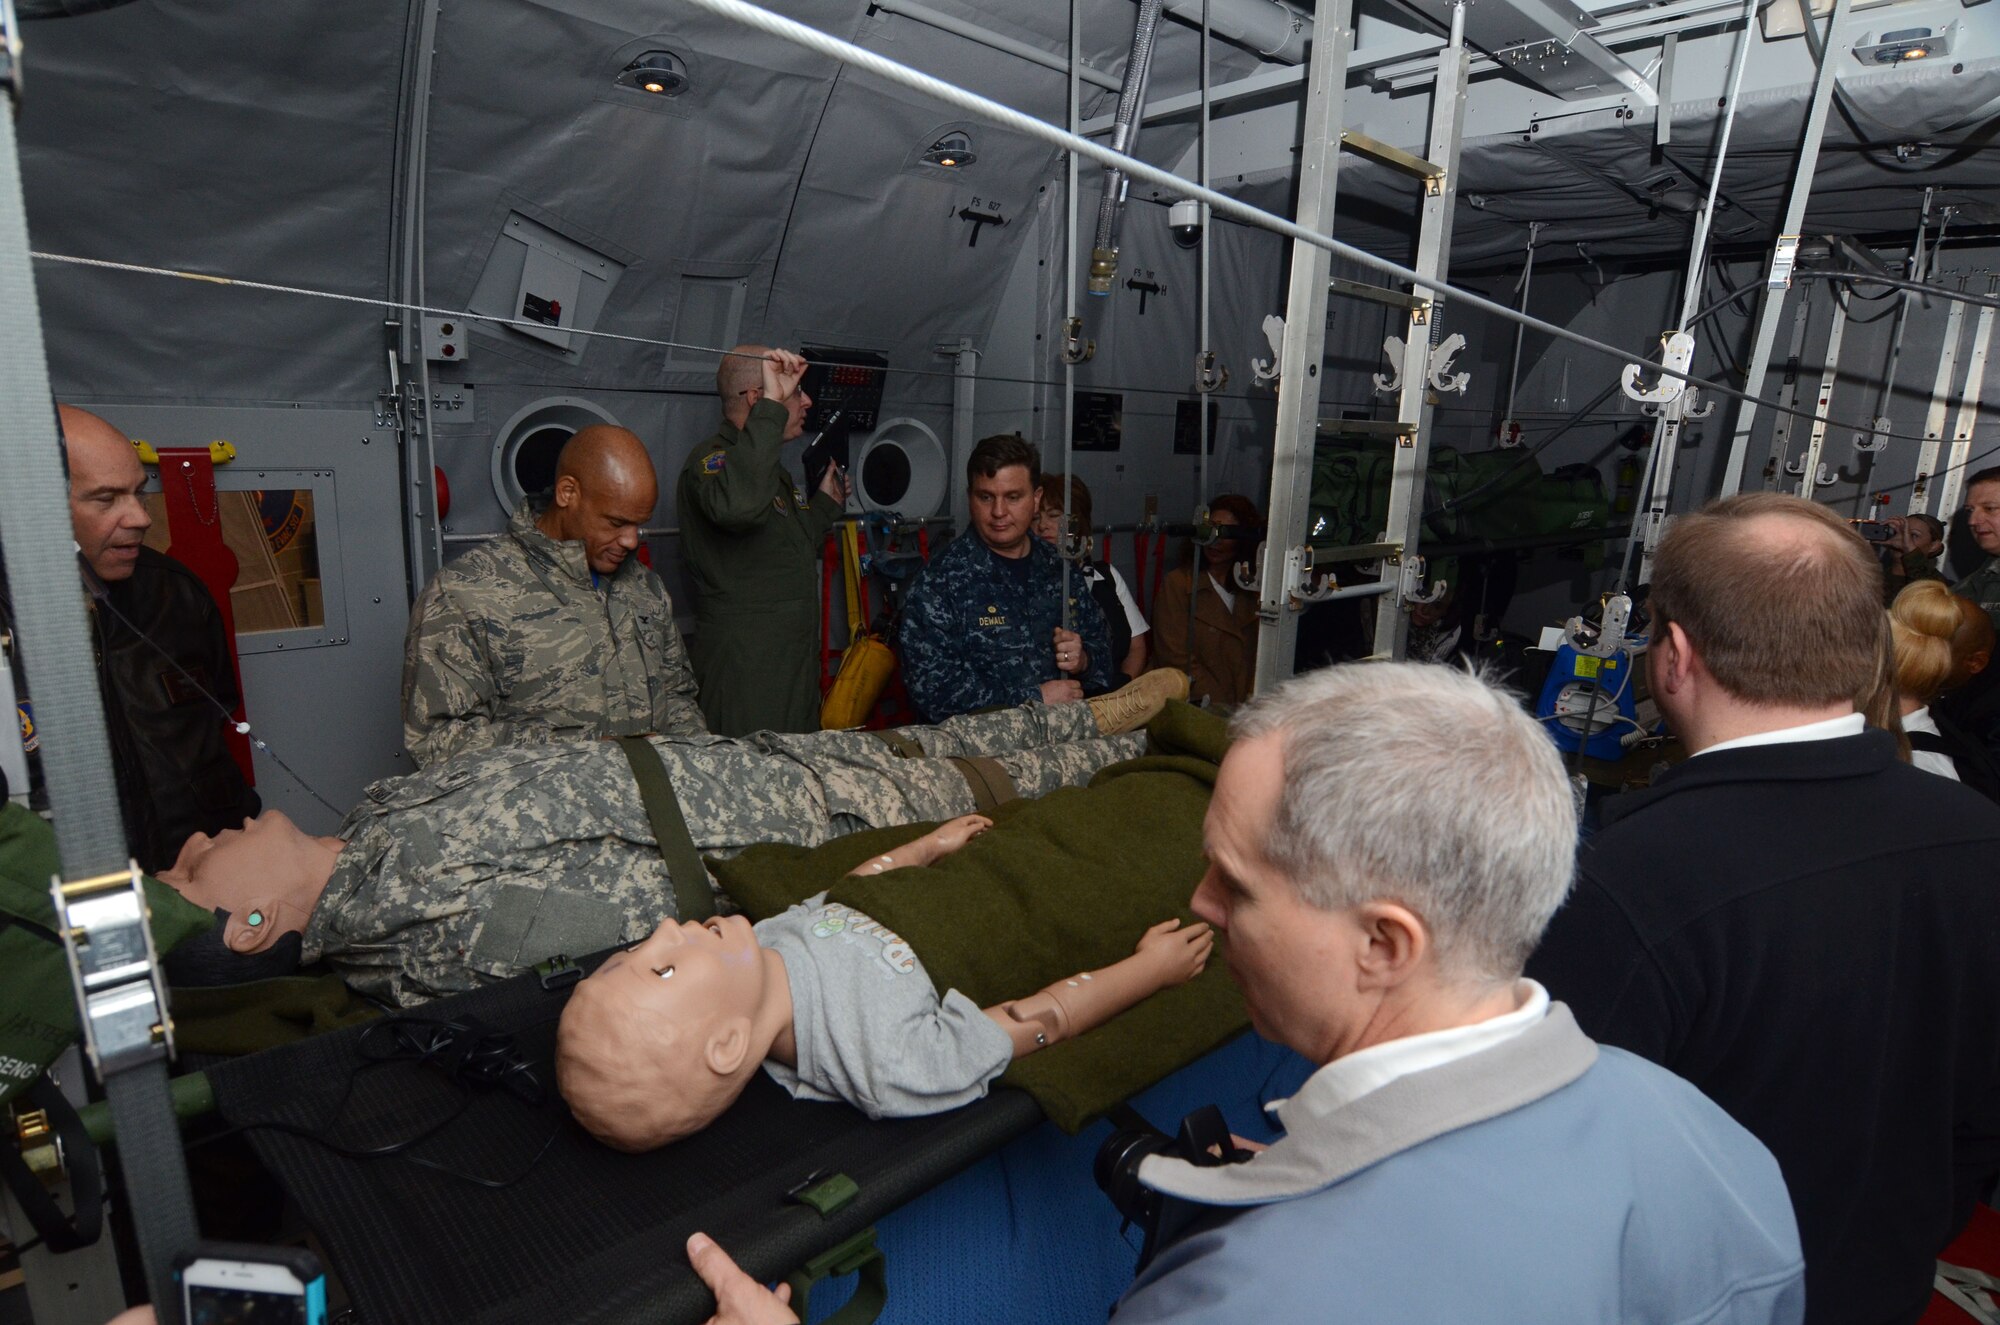 Maj. Chad Corliss, Director of Operations from the 94th Aeromedical Evacuation Squadron briefs members of the Honorary Commanders Association on the functions of a newly installed aeromedical evacuation training simulator. The system is designed to simulate various emergency conditions experienced by medical personnel during evacuation scenarios. The demonstration was part of Dobbins Day, a base tour conducted on Dobbins Air Reserve Base, Ga. Feb. 12, 2016 (U.S. Air Force photo/Don Peek)